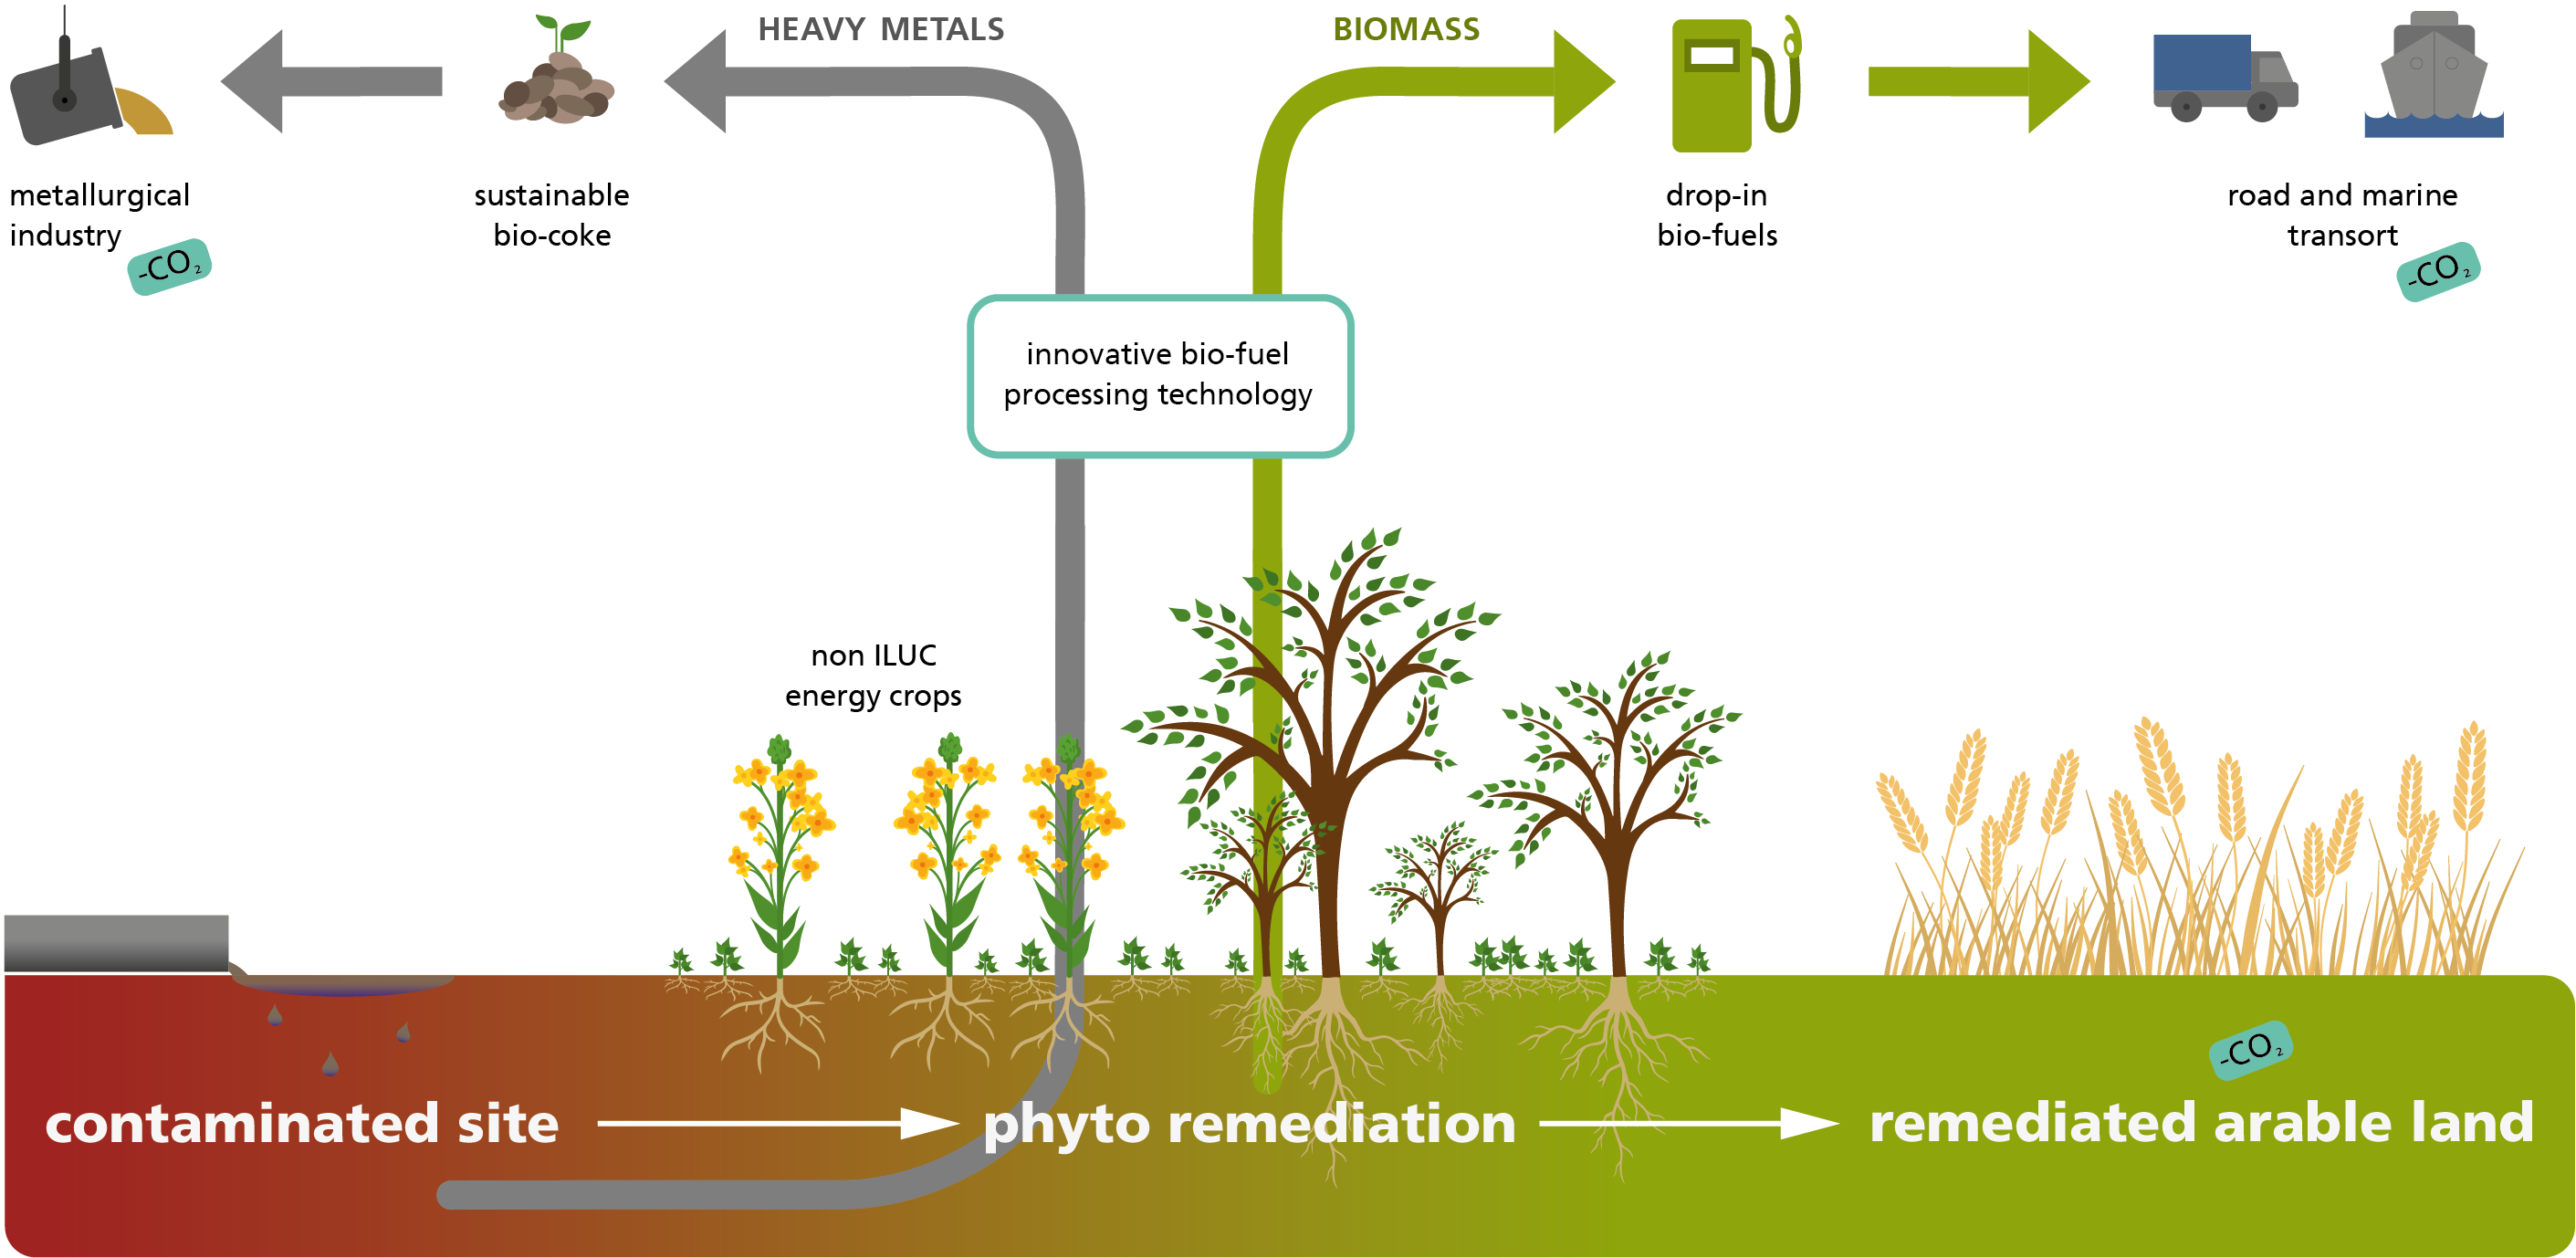 Phytoremediation of contaminated land with simultaneous production of synthetic biofuel and biocoke for industrial processes